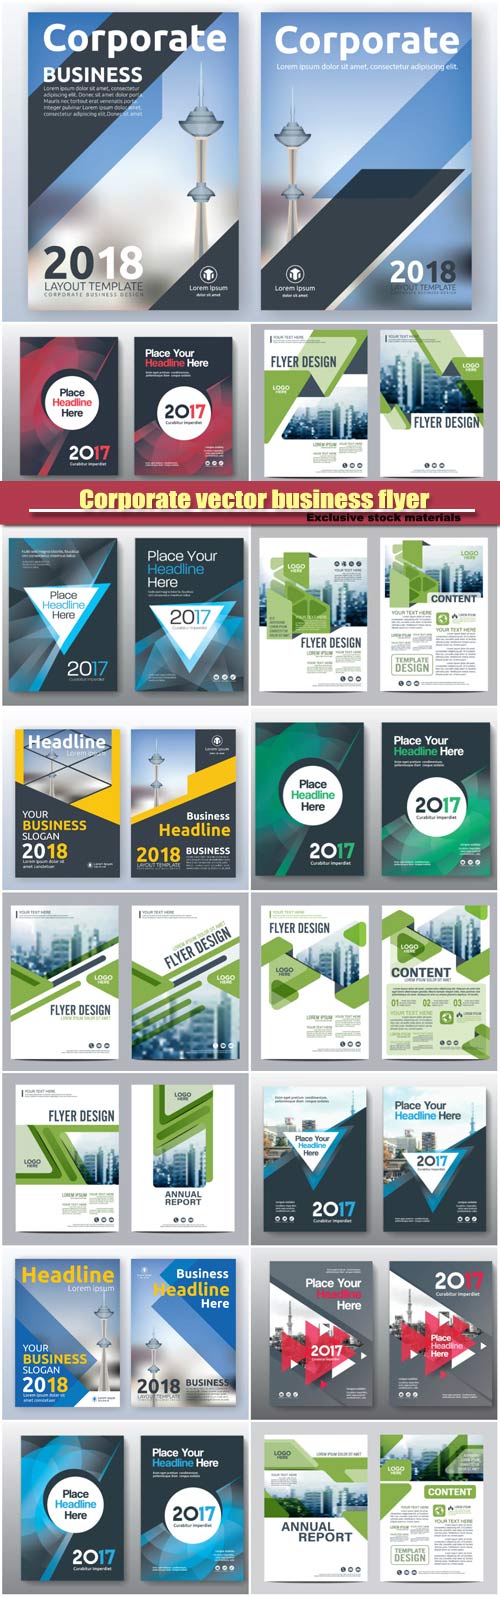 Corporate vector business flyer layout templates design, brochure, book cover